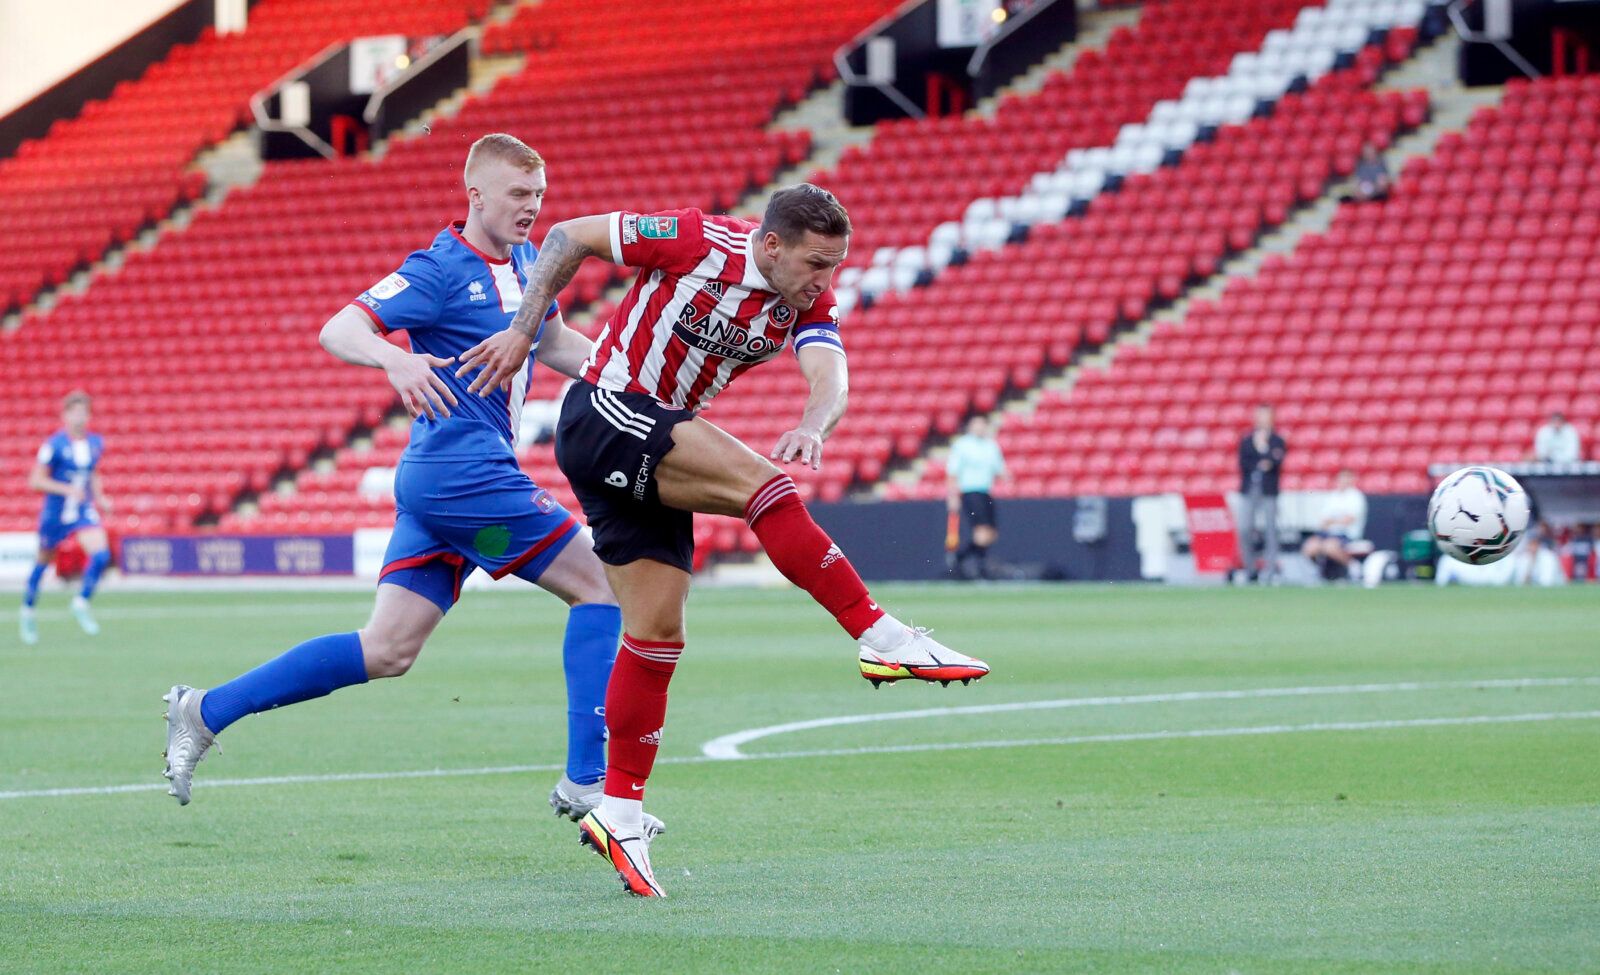 Soccer Football - Carabao Cup - First Round - Sheffield United v Carlisle United - Bramall Lane, Sheffield, Britain - August 10, 2021 Sheffield United's Billy Sharp shoots at goal Action Images/Ed Sykes EDITORIAL USE ONLY. No use with unauthorized audio, video, data, fixture lists, club/league logos or 'live' services. Online in-match use limited to 75 images, no video emulation. No use in betting, games or single club /league/player publications.  Please contact your account representative for 